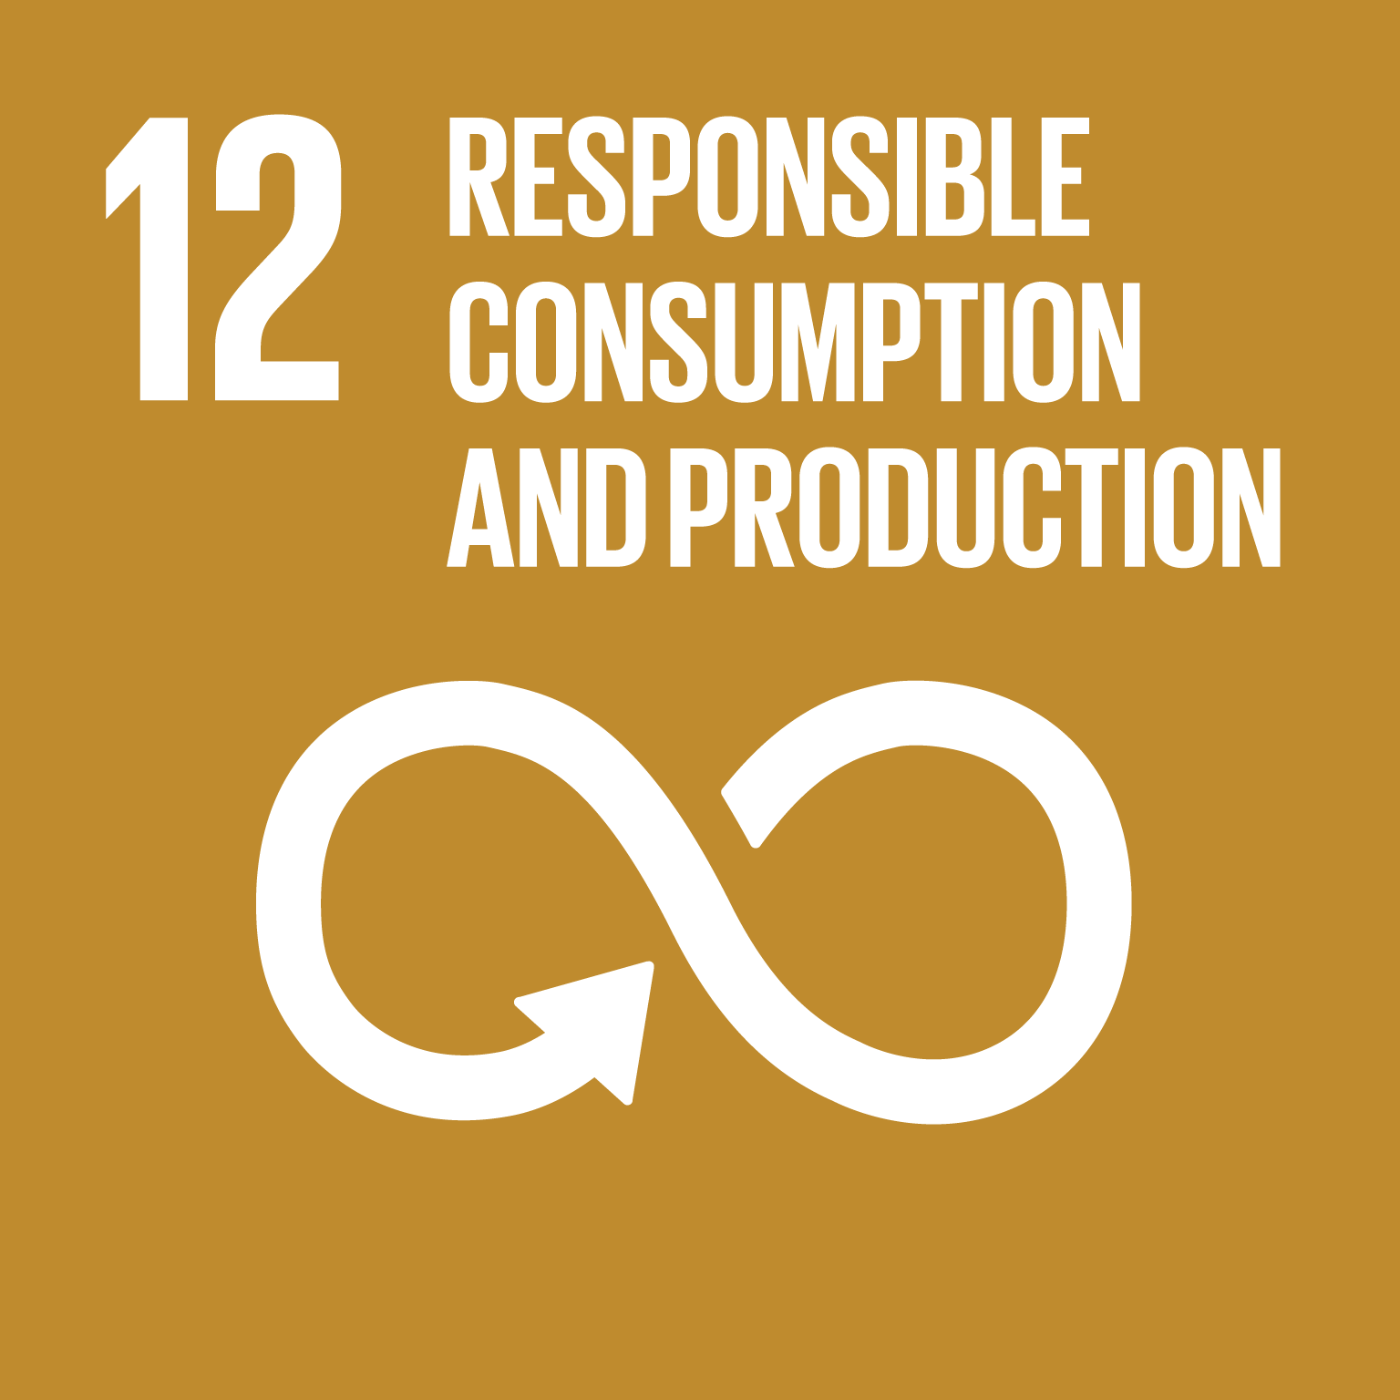 12 RESPONSIBLE CONSUMPTION AND PRODUCTION